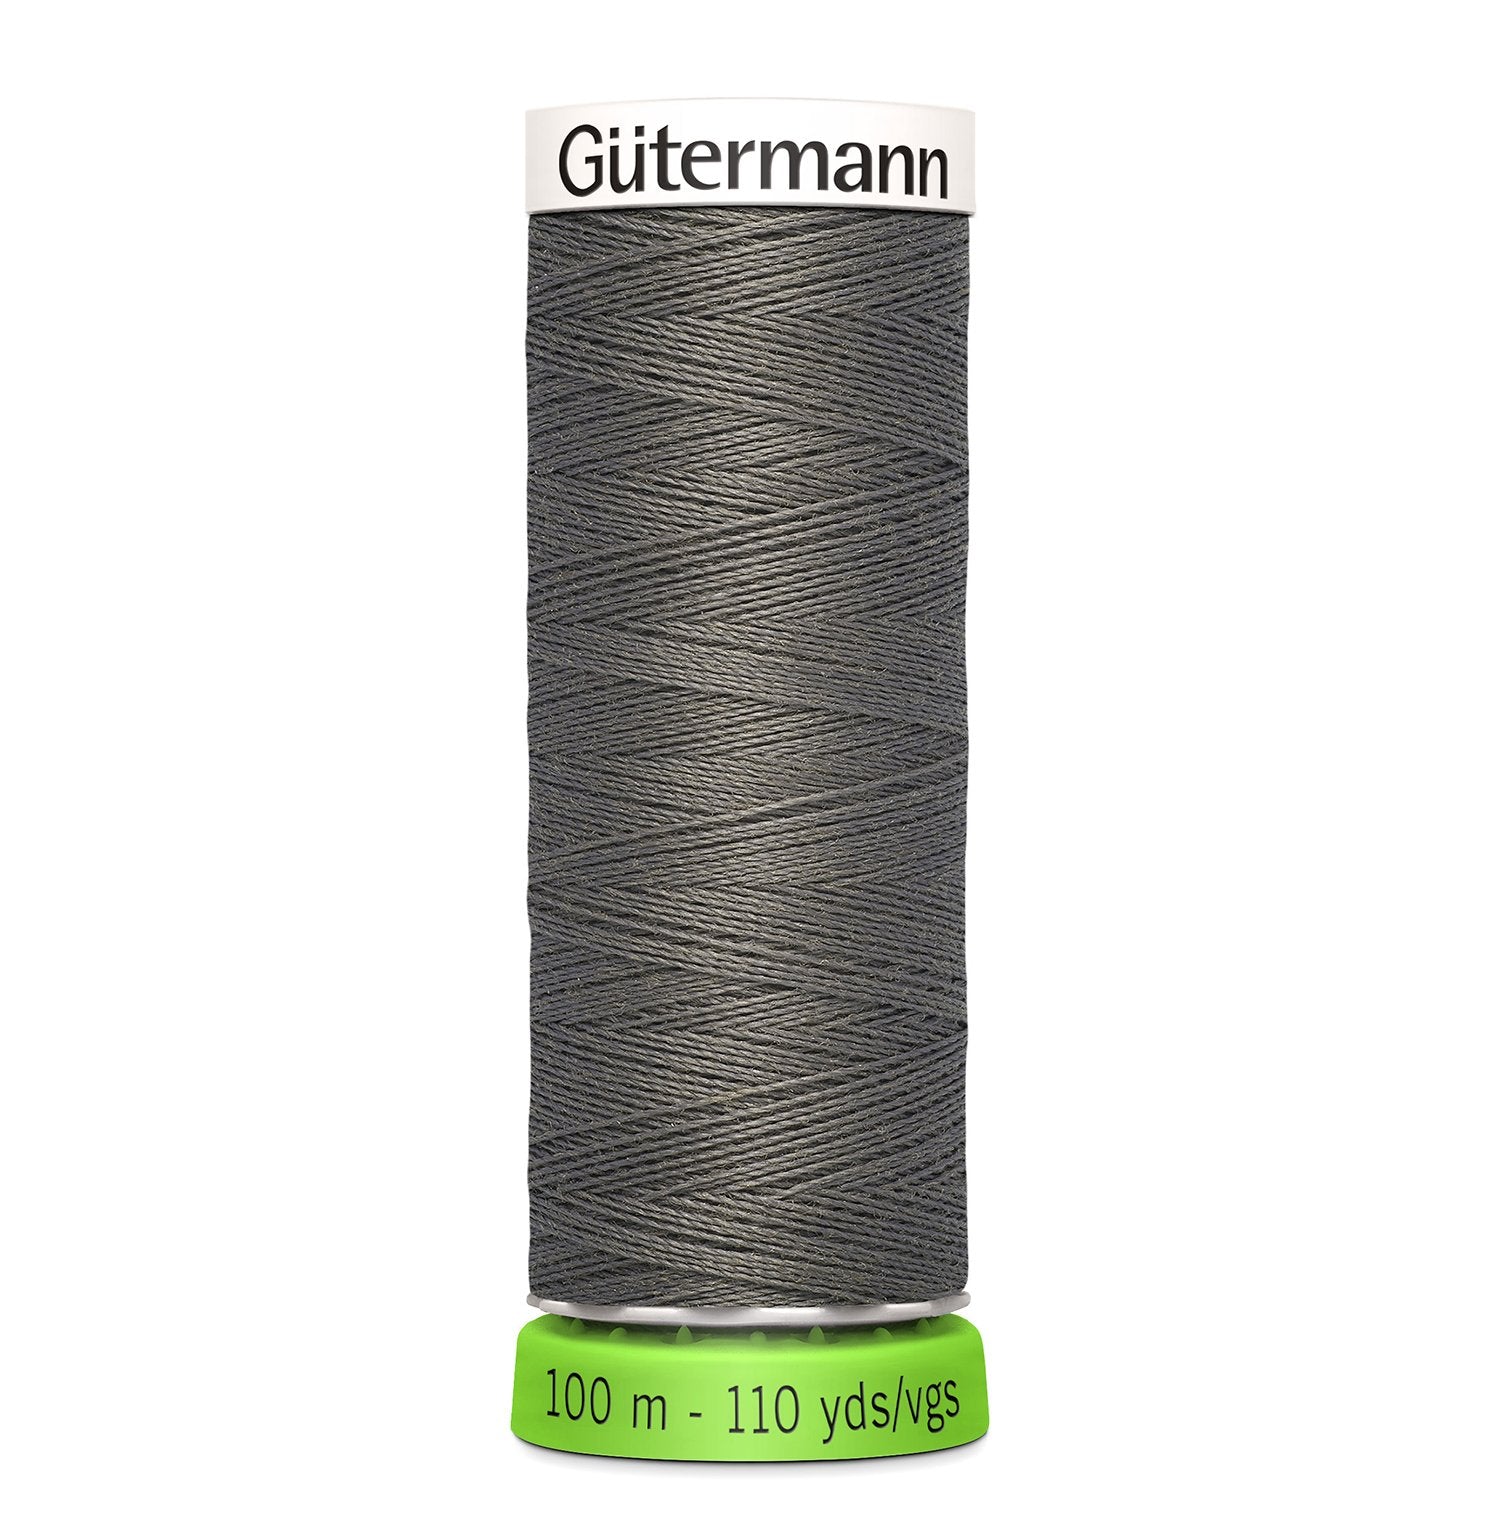 Gutermann Recycled Thread 100m, Colour 35 from Jaycotts Sewing Supplies